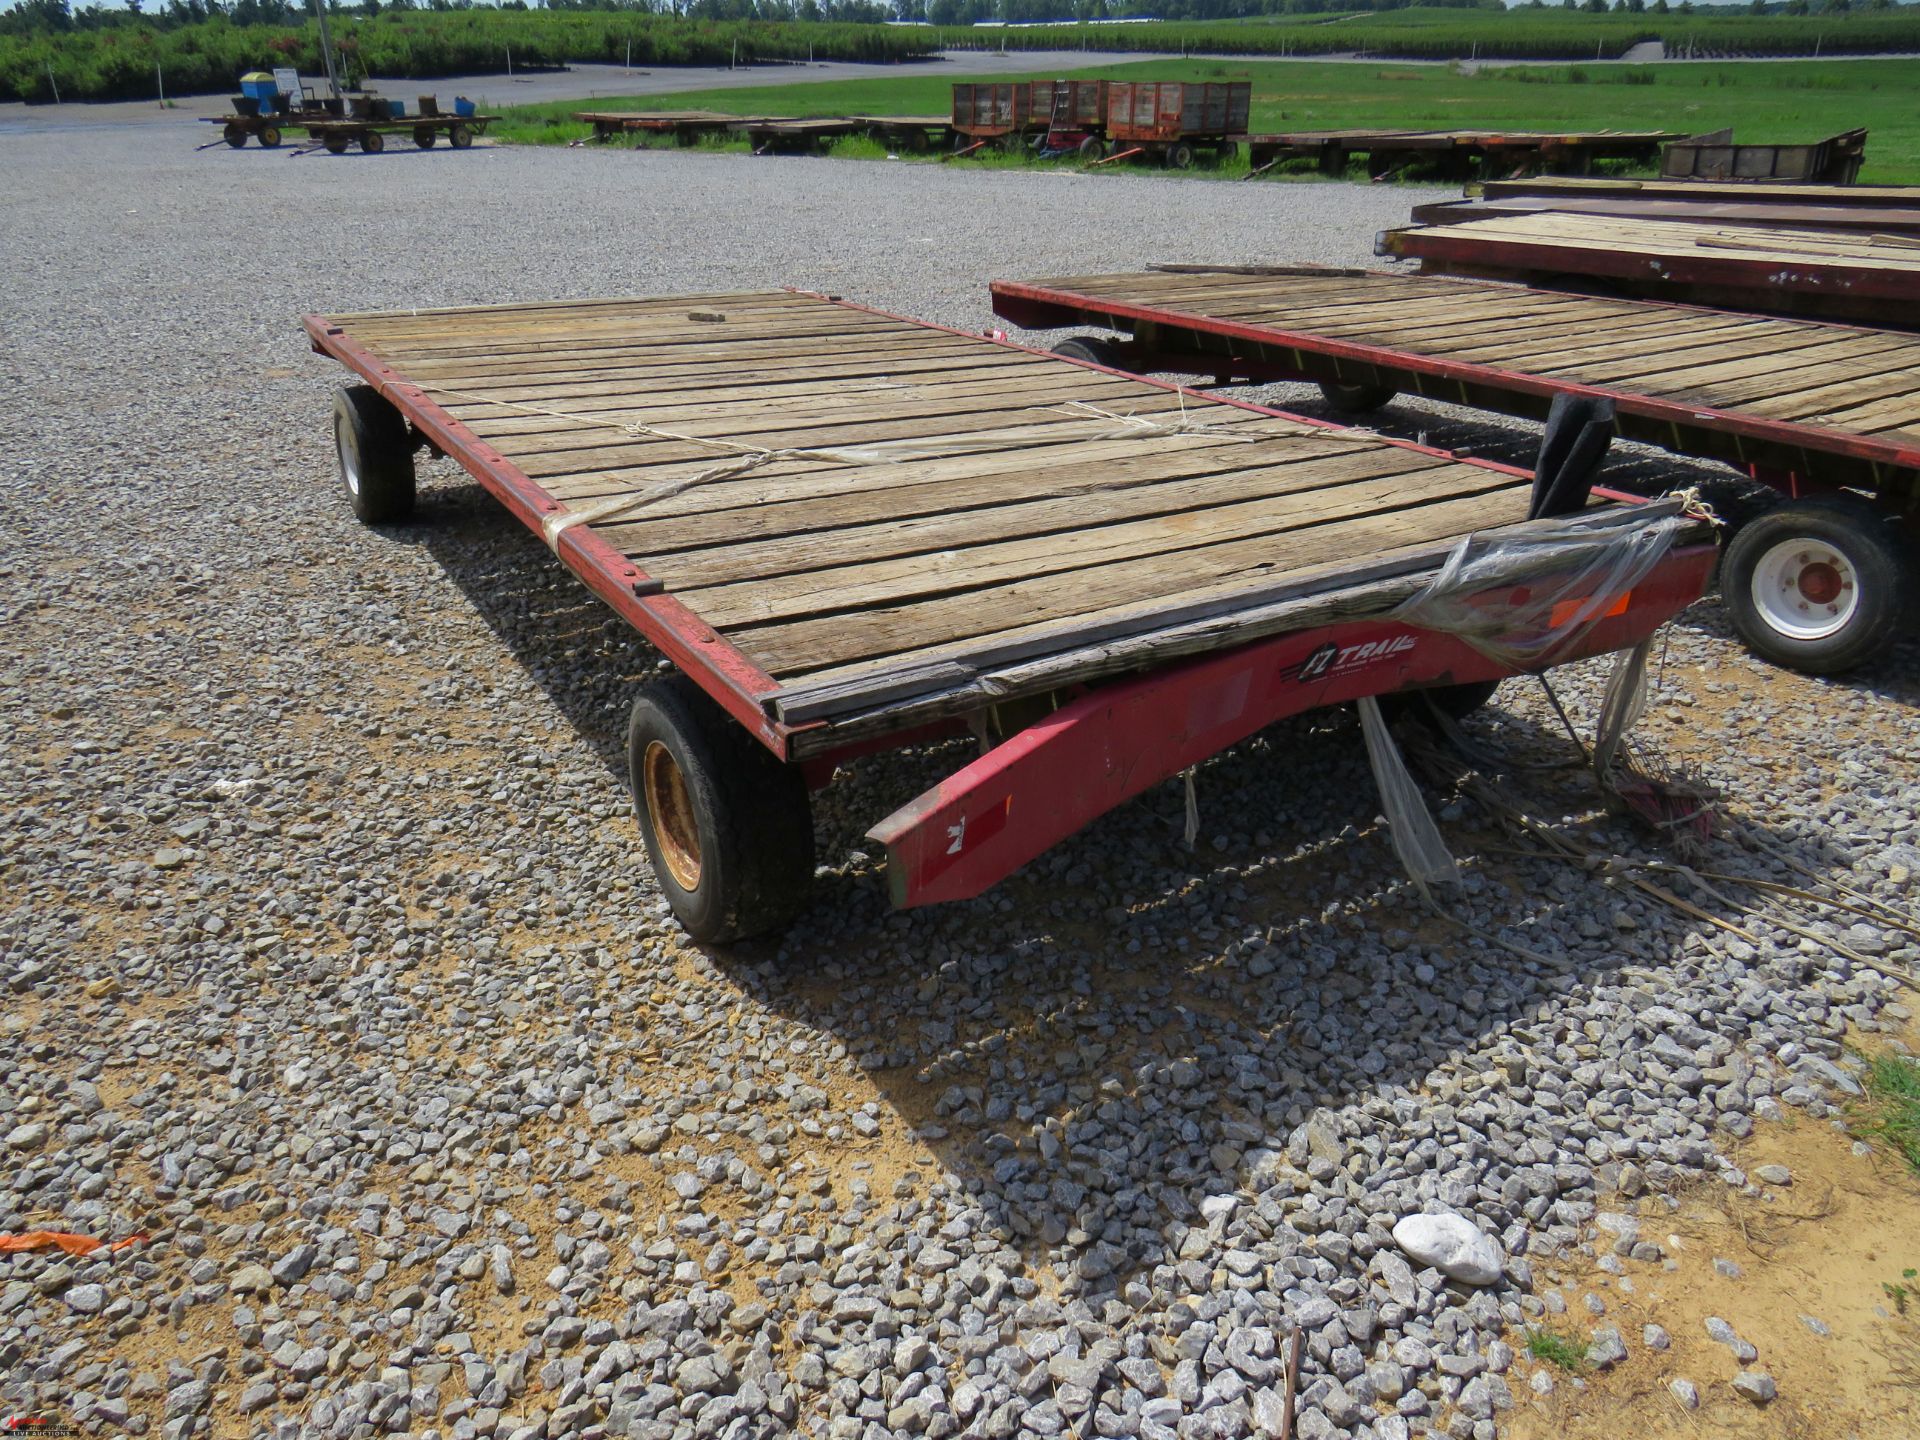 EZ TRAIL FLAT BED TRAILER, 15', SMALL TIRES, PIN HITCH - Image 3 of 3